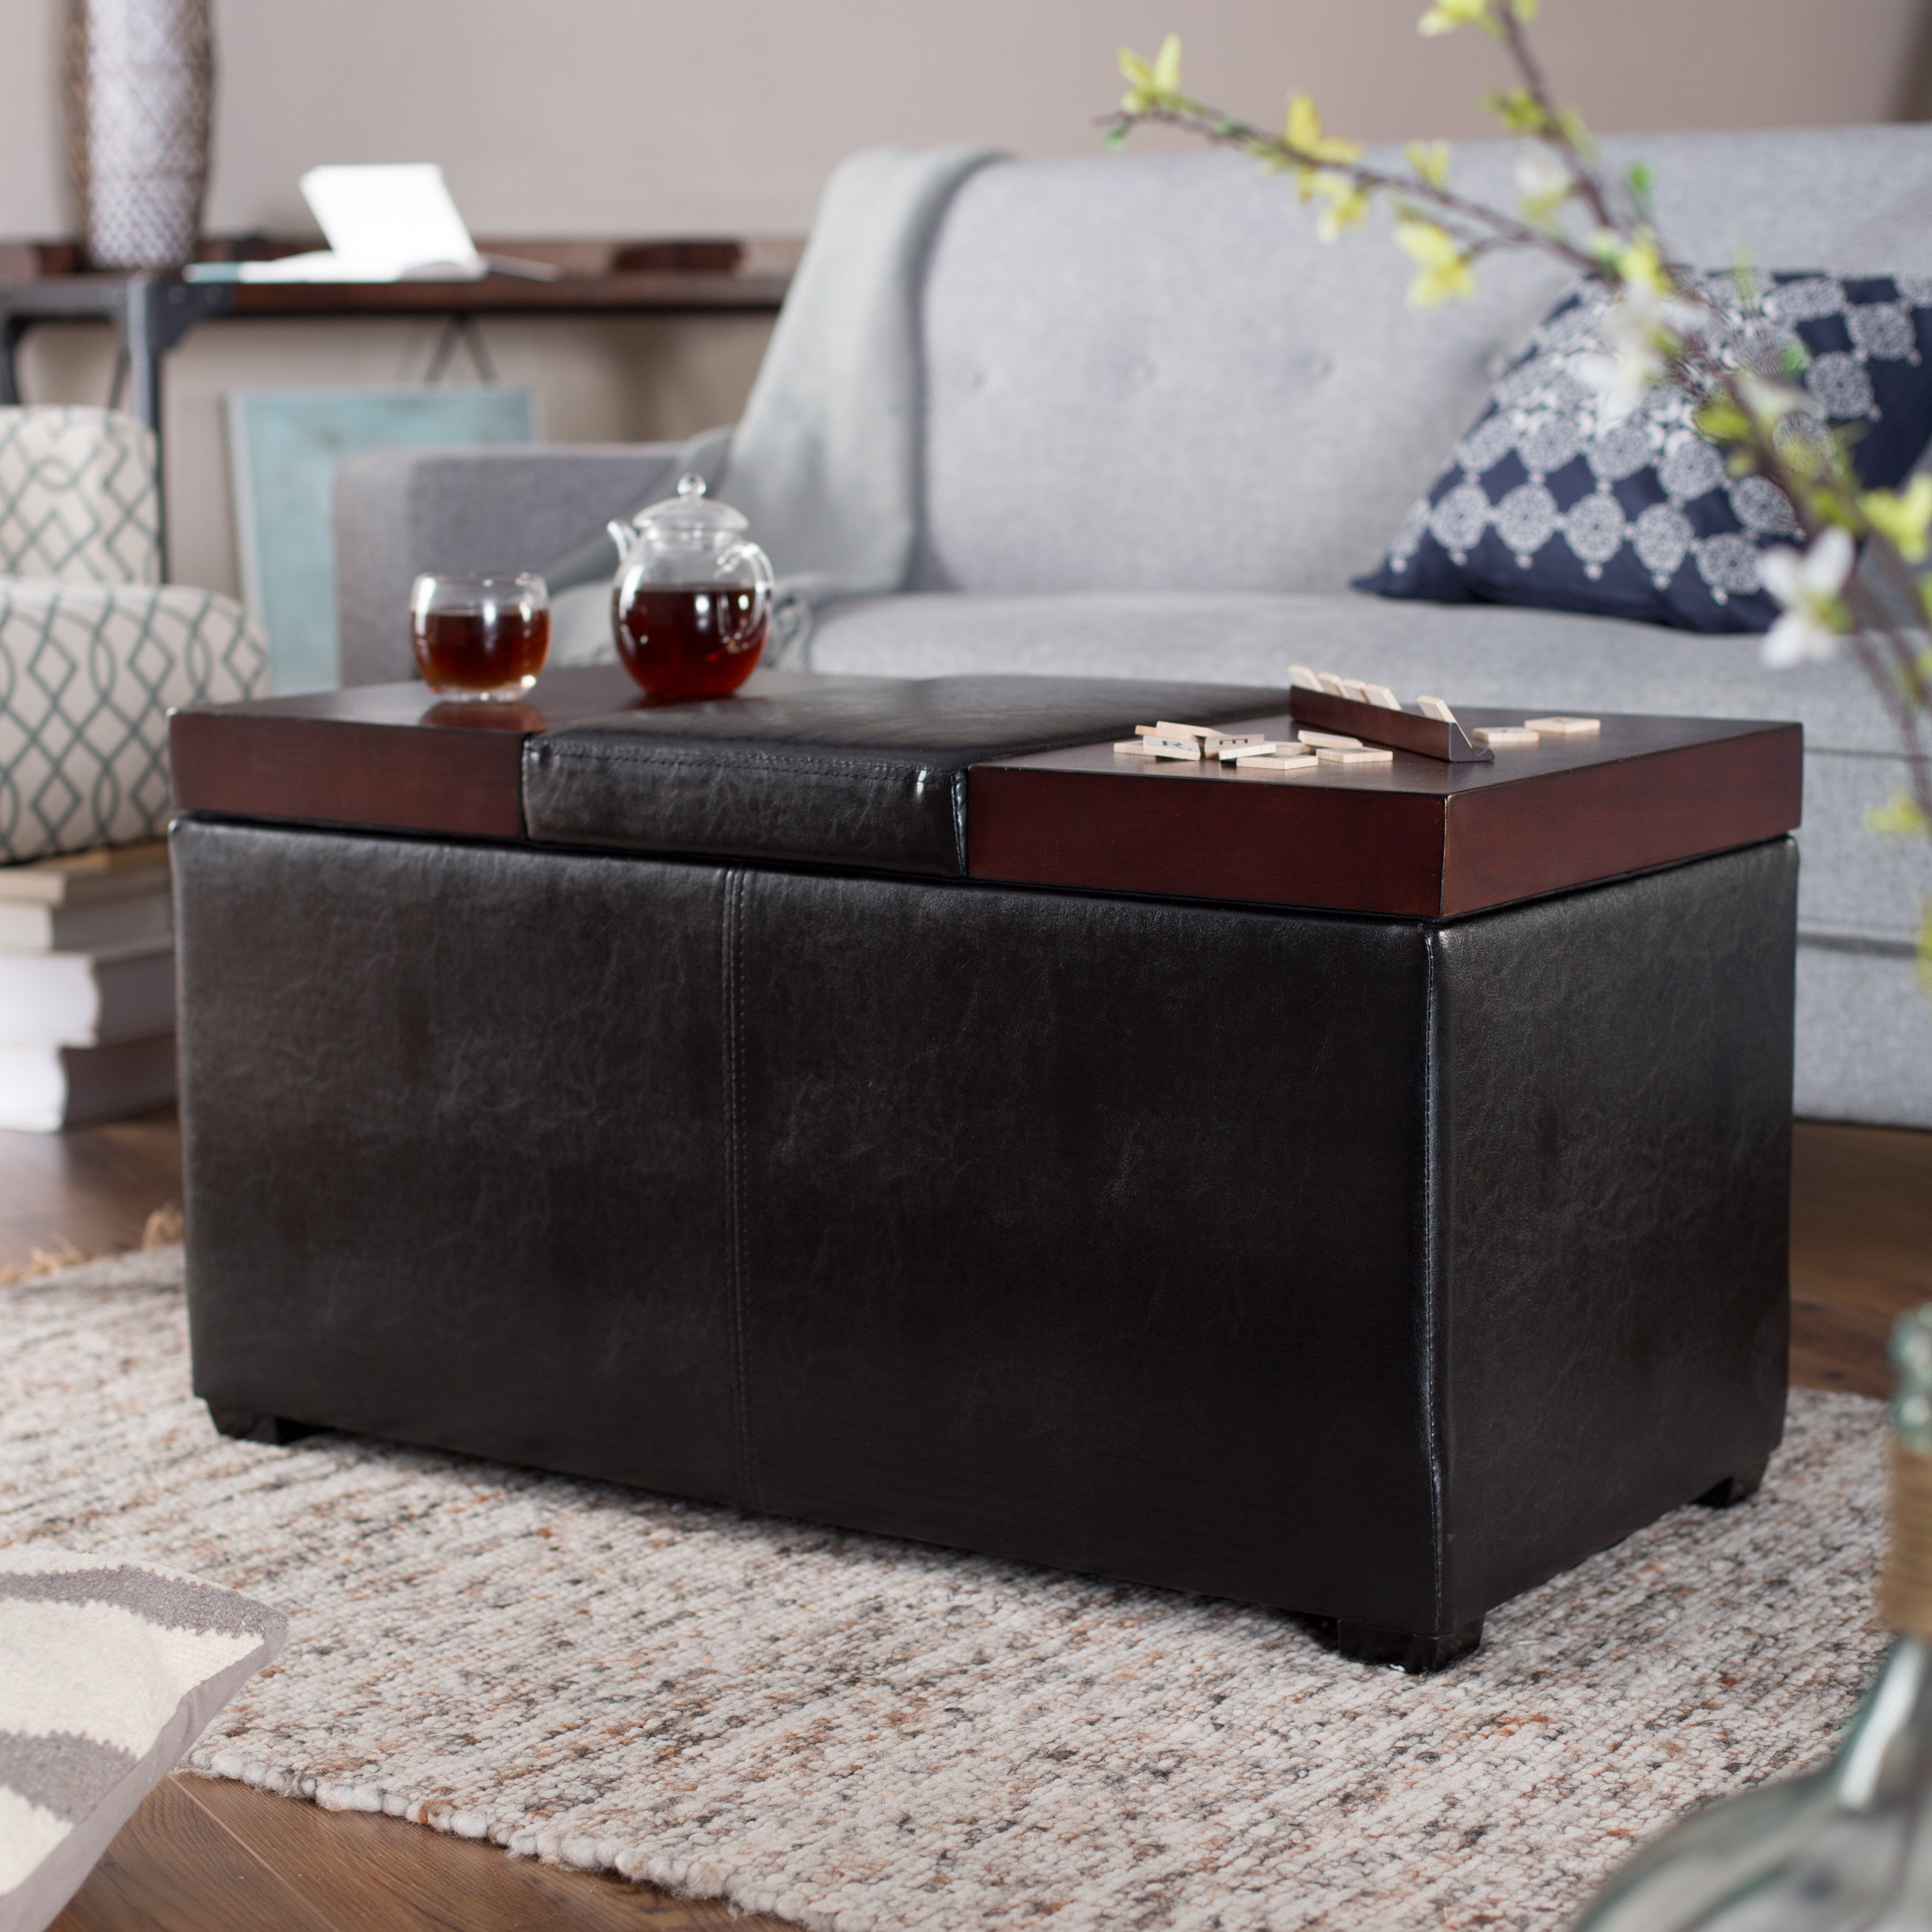 Mainstays Lift Top Coffee Table Multiple Colors Walmart throughout The Most Amazing  coffee table with canvas storage for  House